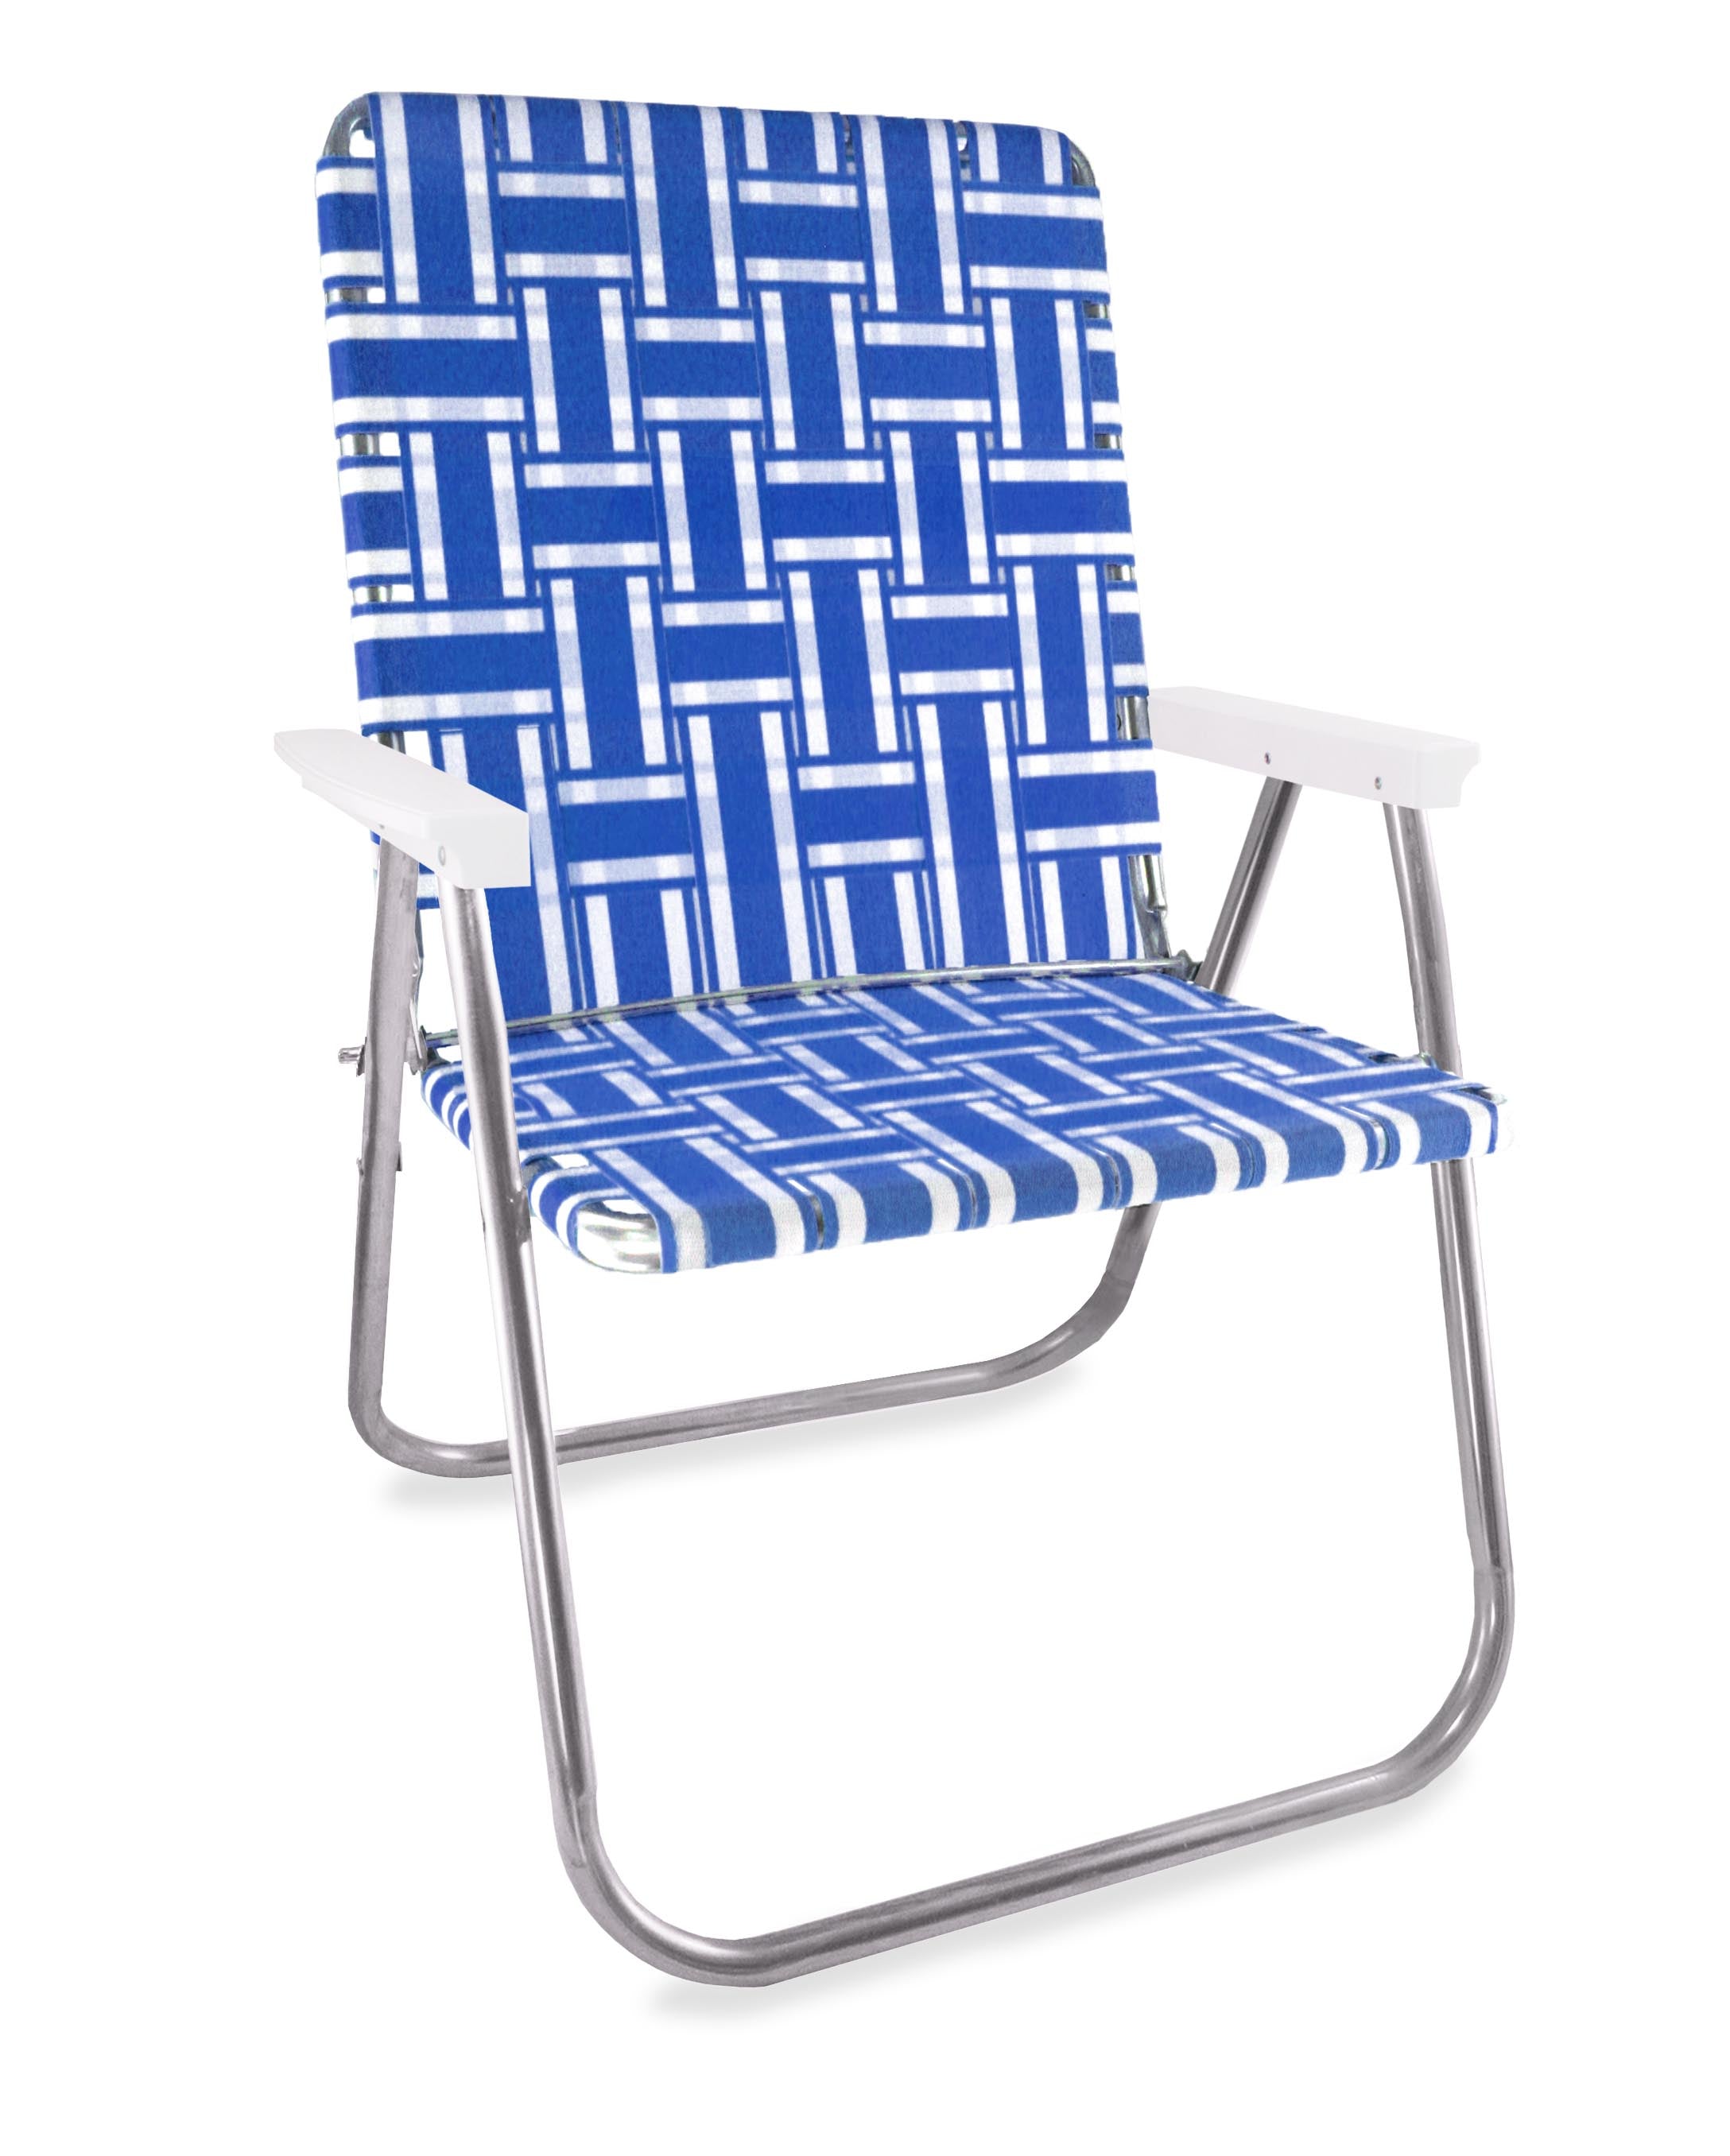 Lawn Chair USA American Made Folding Lightweight Aluminum Webbing Chair - image 1 of 7